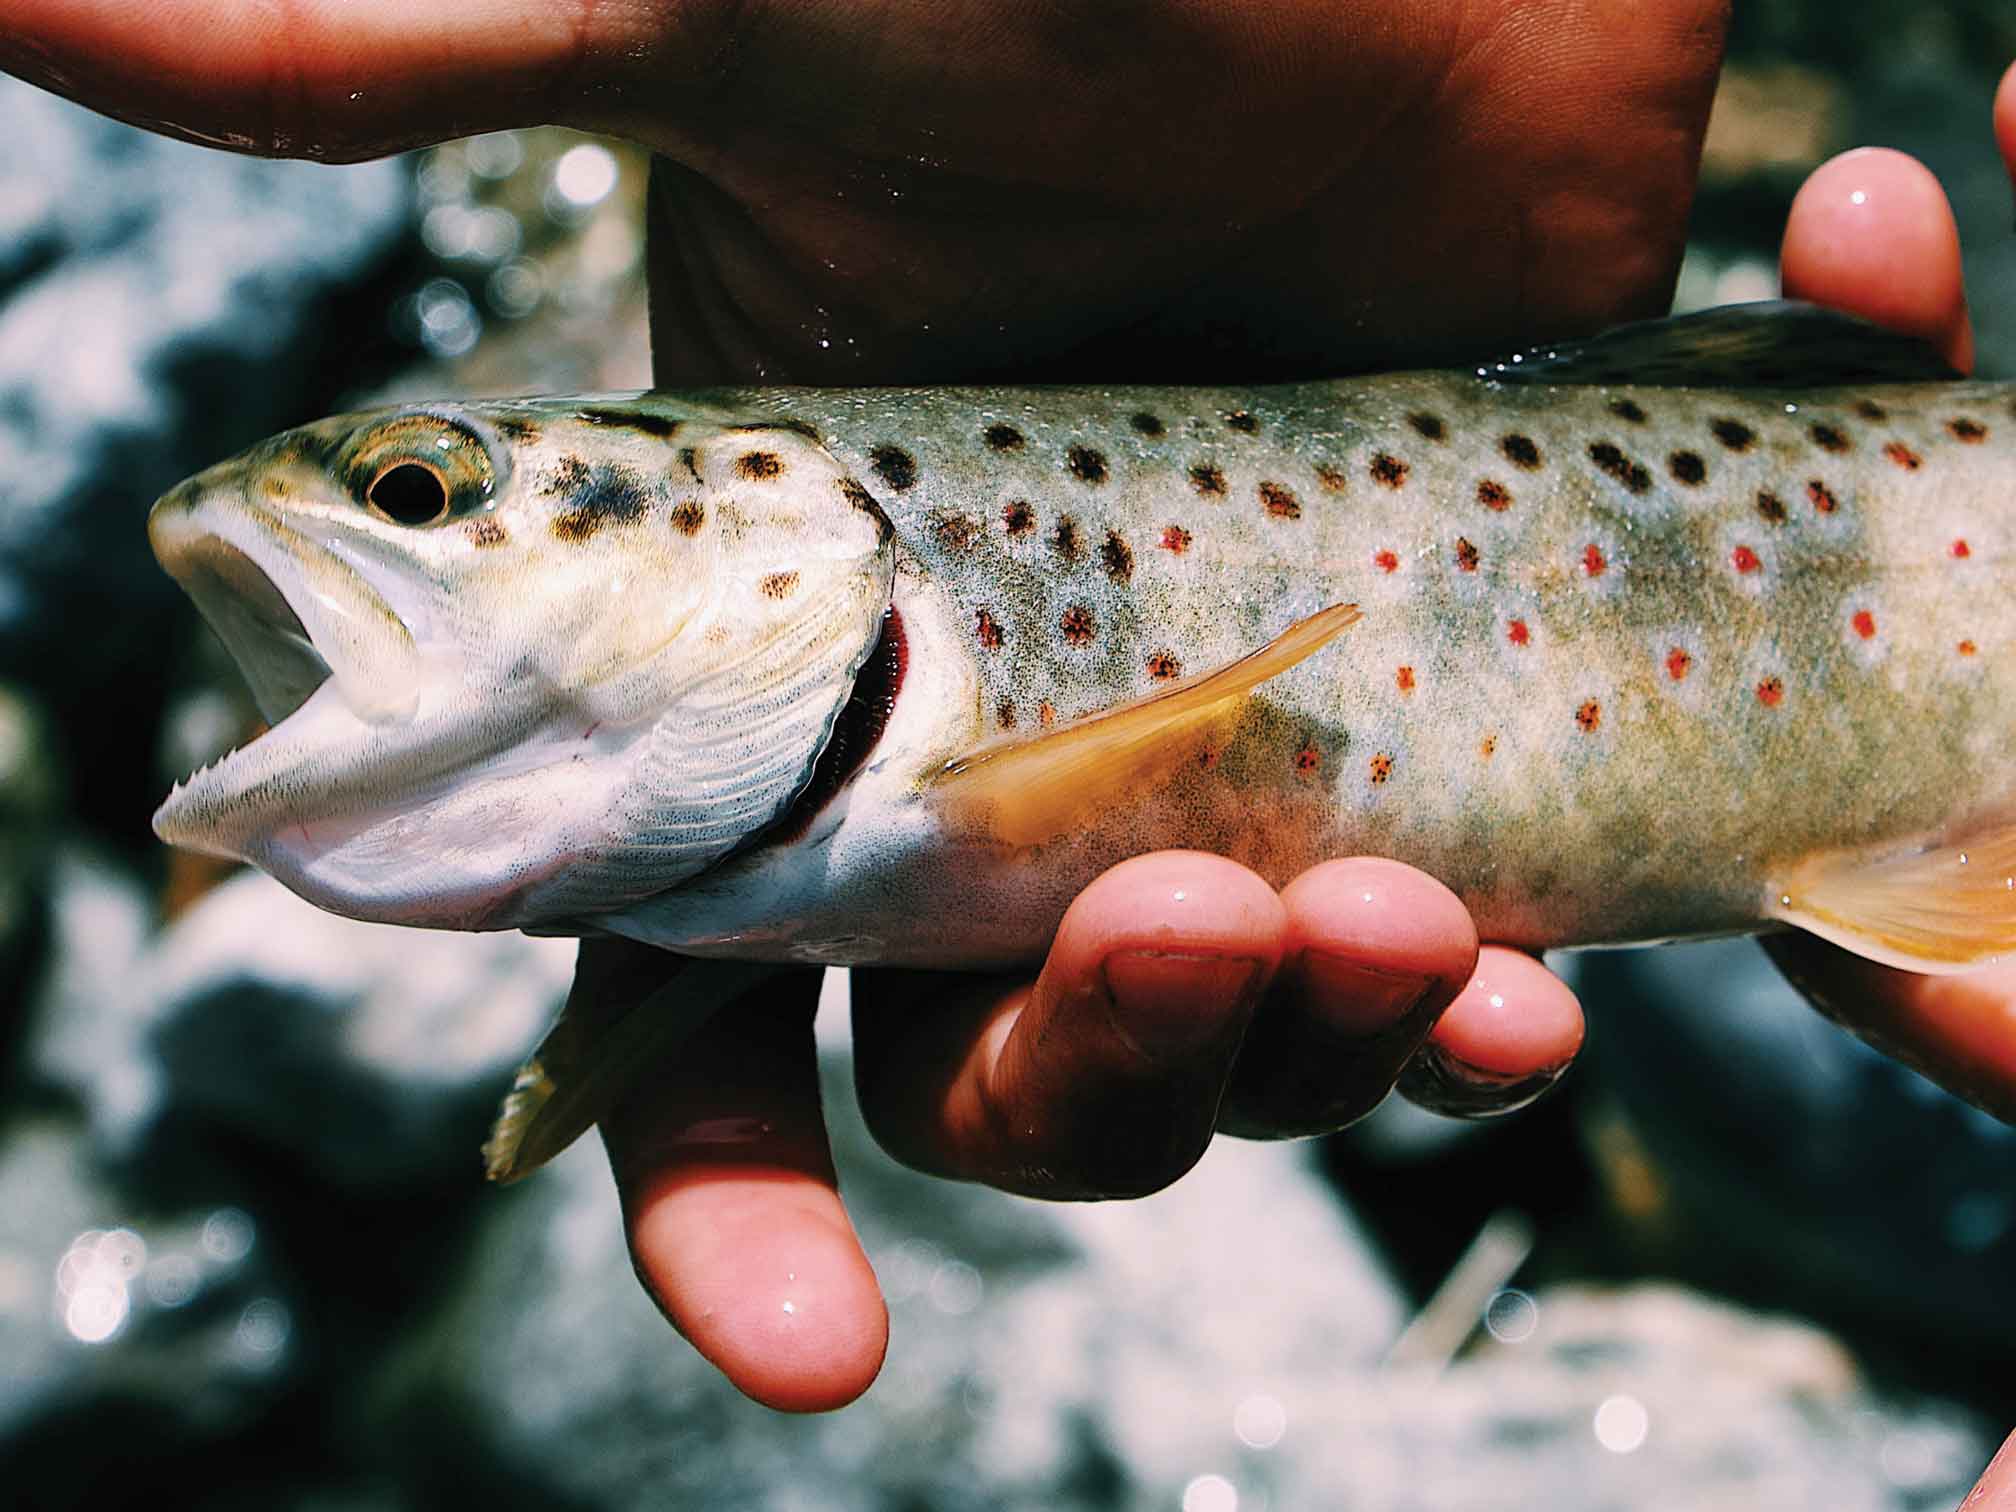 Spotted Brown Trout represents some of the wild adventures in fishing in the Canadian Rockies